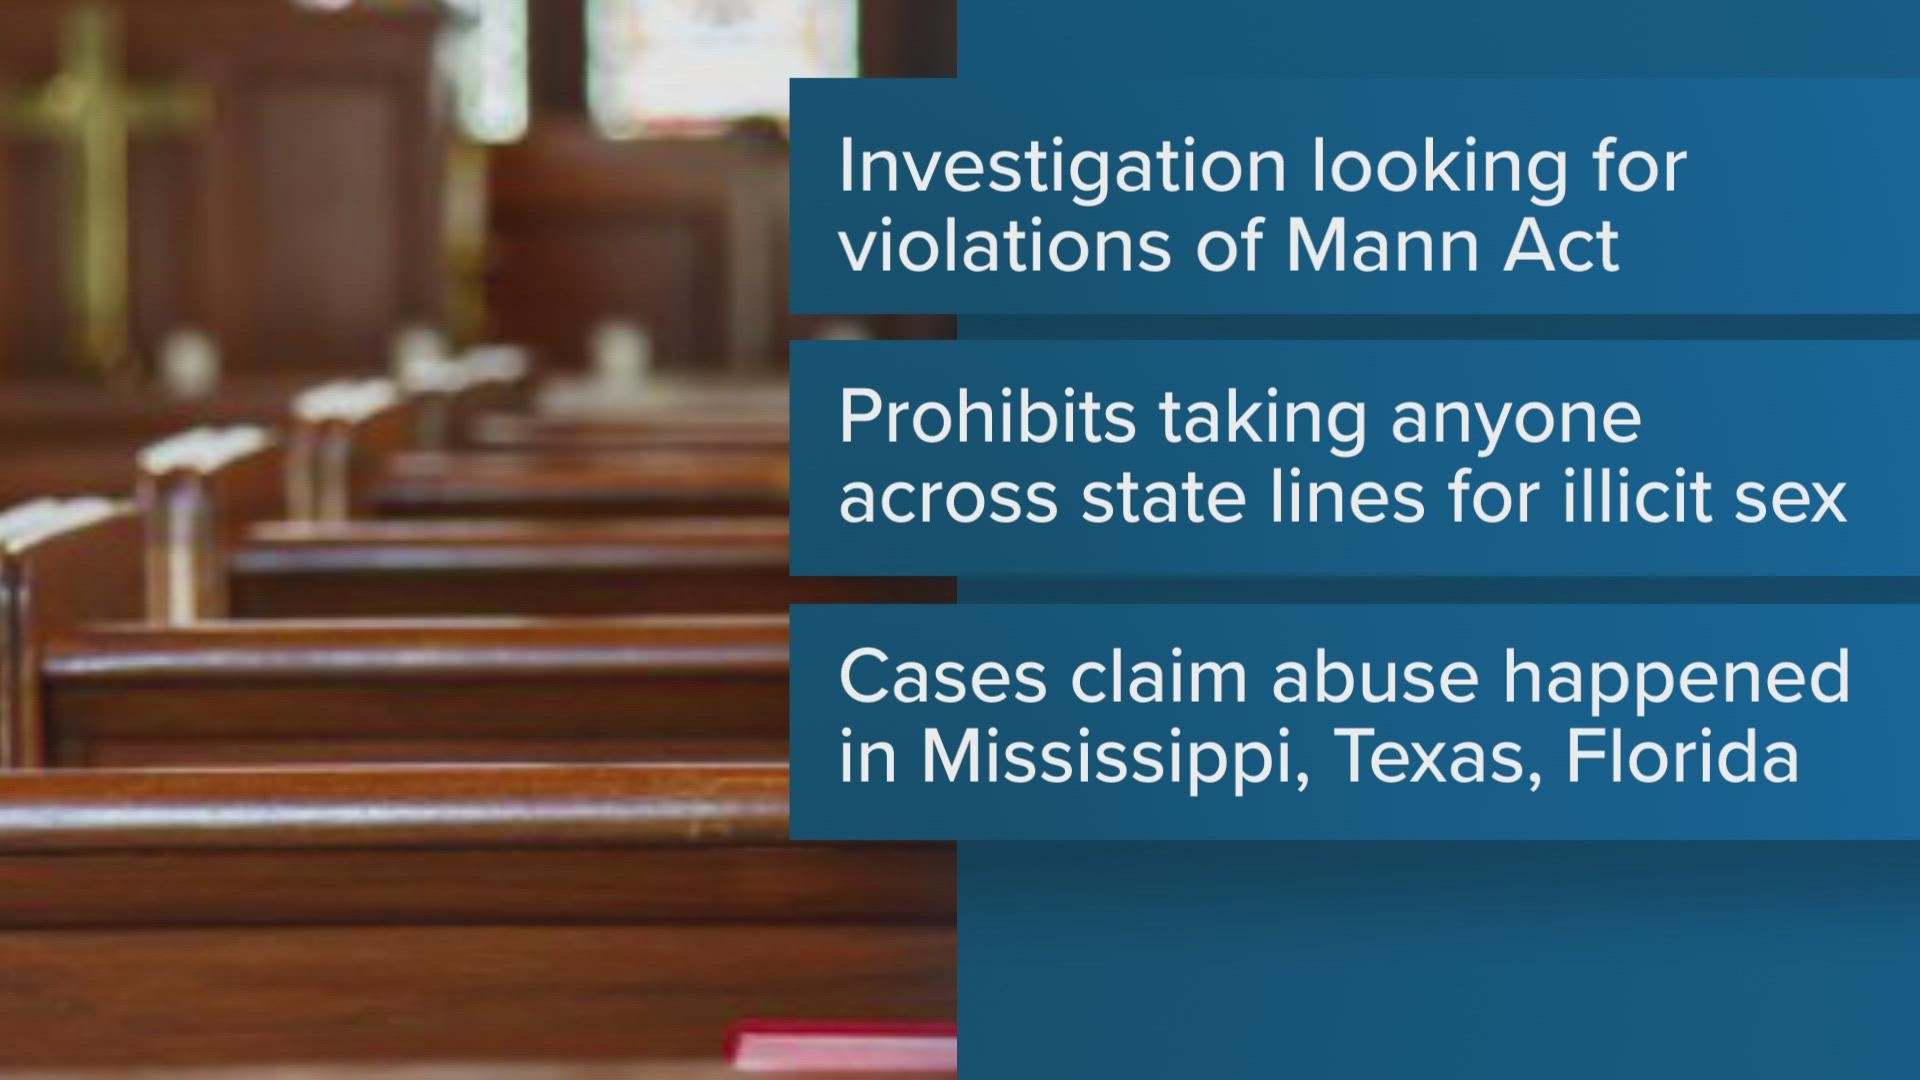 Some of the New Orleans cases under review allege abuse by clergy during trips to Mississippi camps or amusement parks in Texas and Florida.